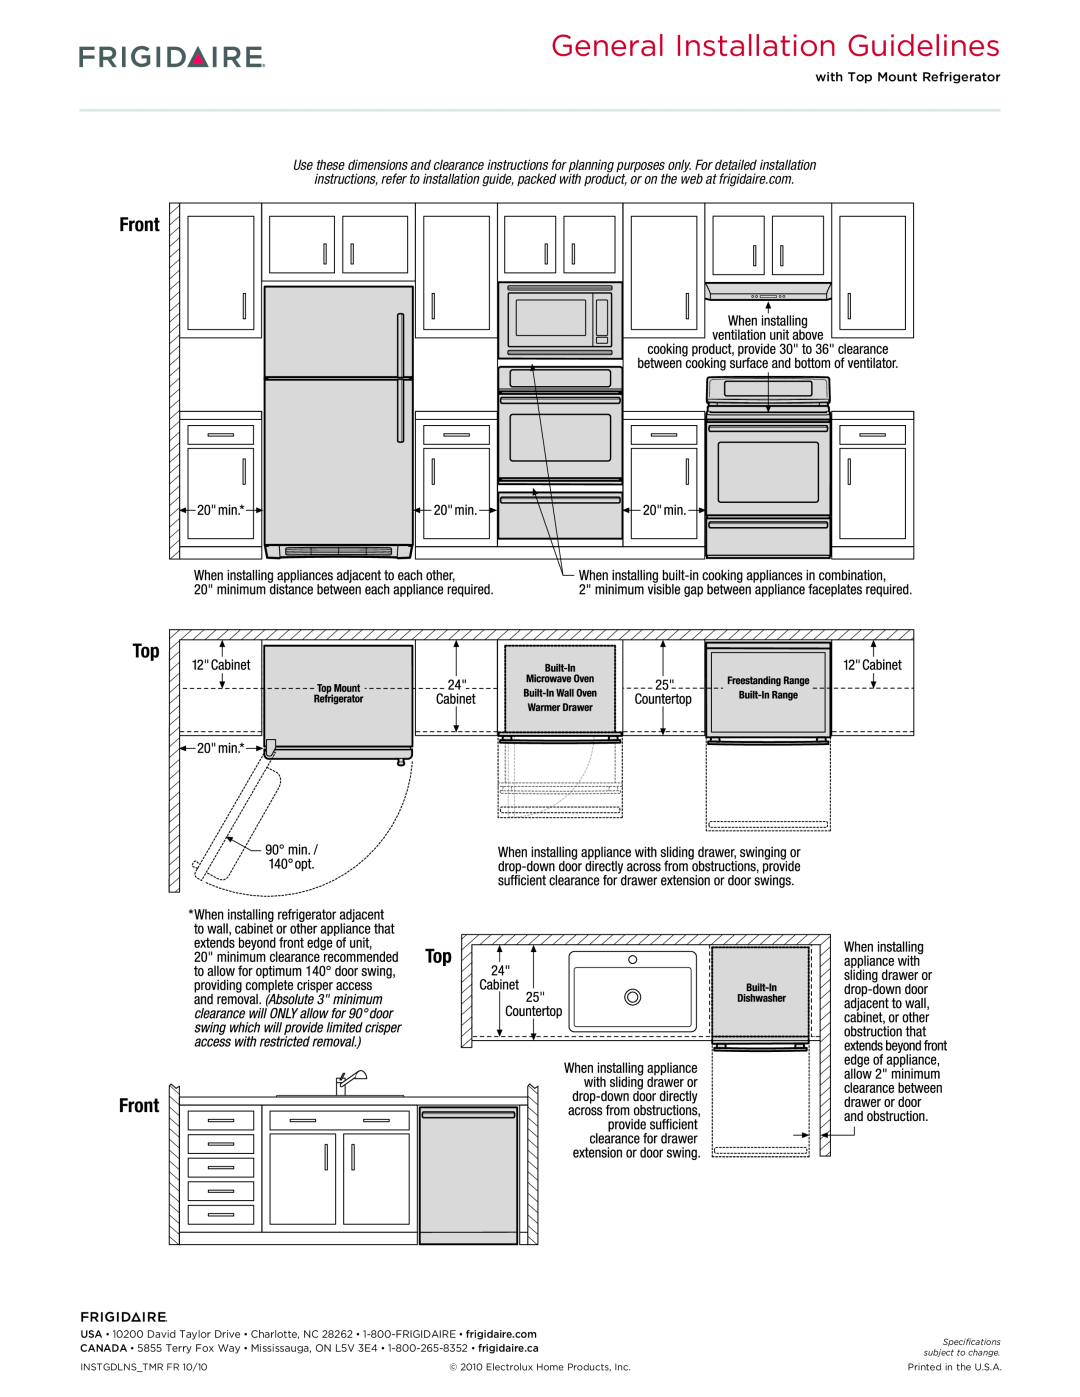 Frigidaire FPIF3093L F General Installation Guidelines, Top Front, with Top Mount Refrigerator, INSTGDLNS_TMR FR 10/10 